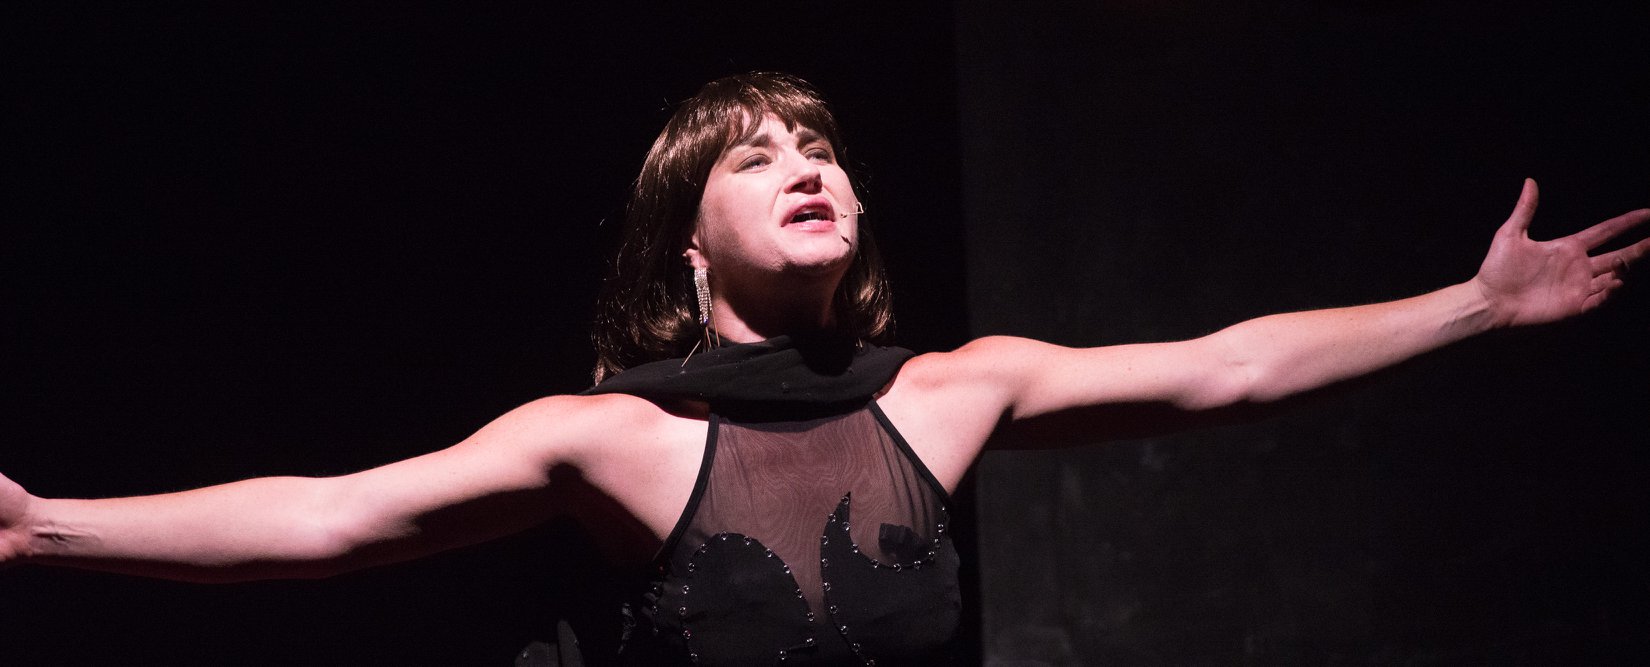 Taryn Noelle with arms outstretched sings  Cabaret for LNT's 2019 production of Cabaret, photo corurtesy of Robert Eddy